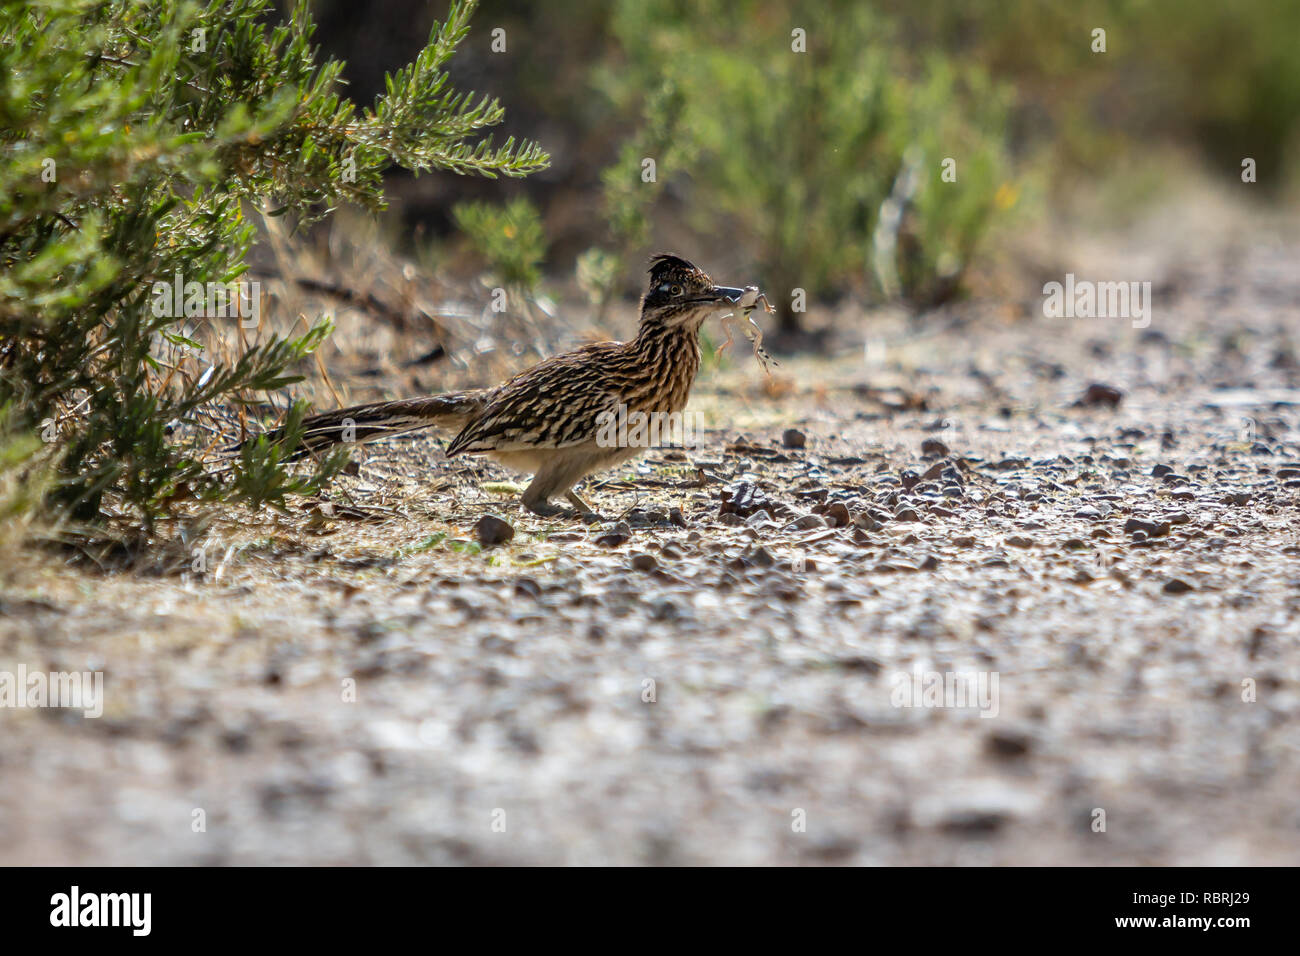 A Roadrunner with a lizard breakfast. Sweetwater Preserve, Tucson. Stock Photo